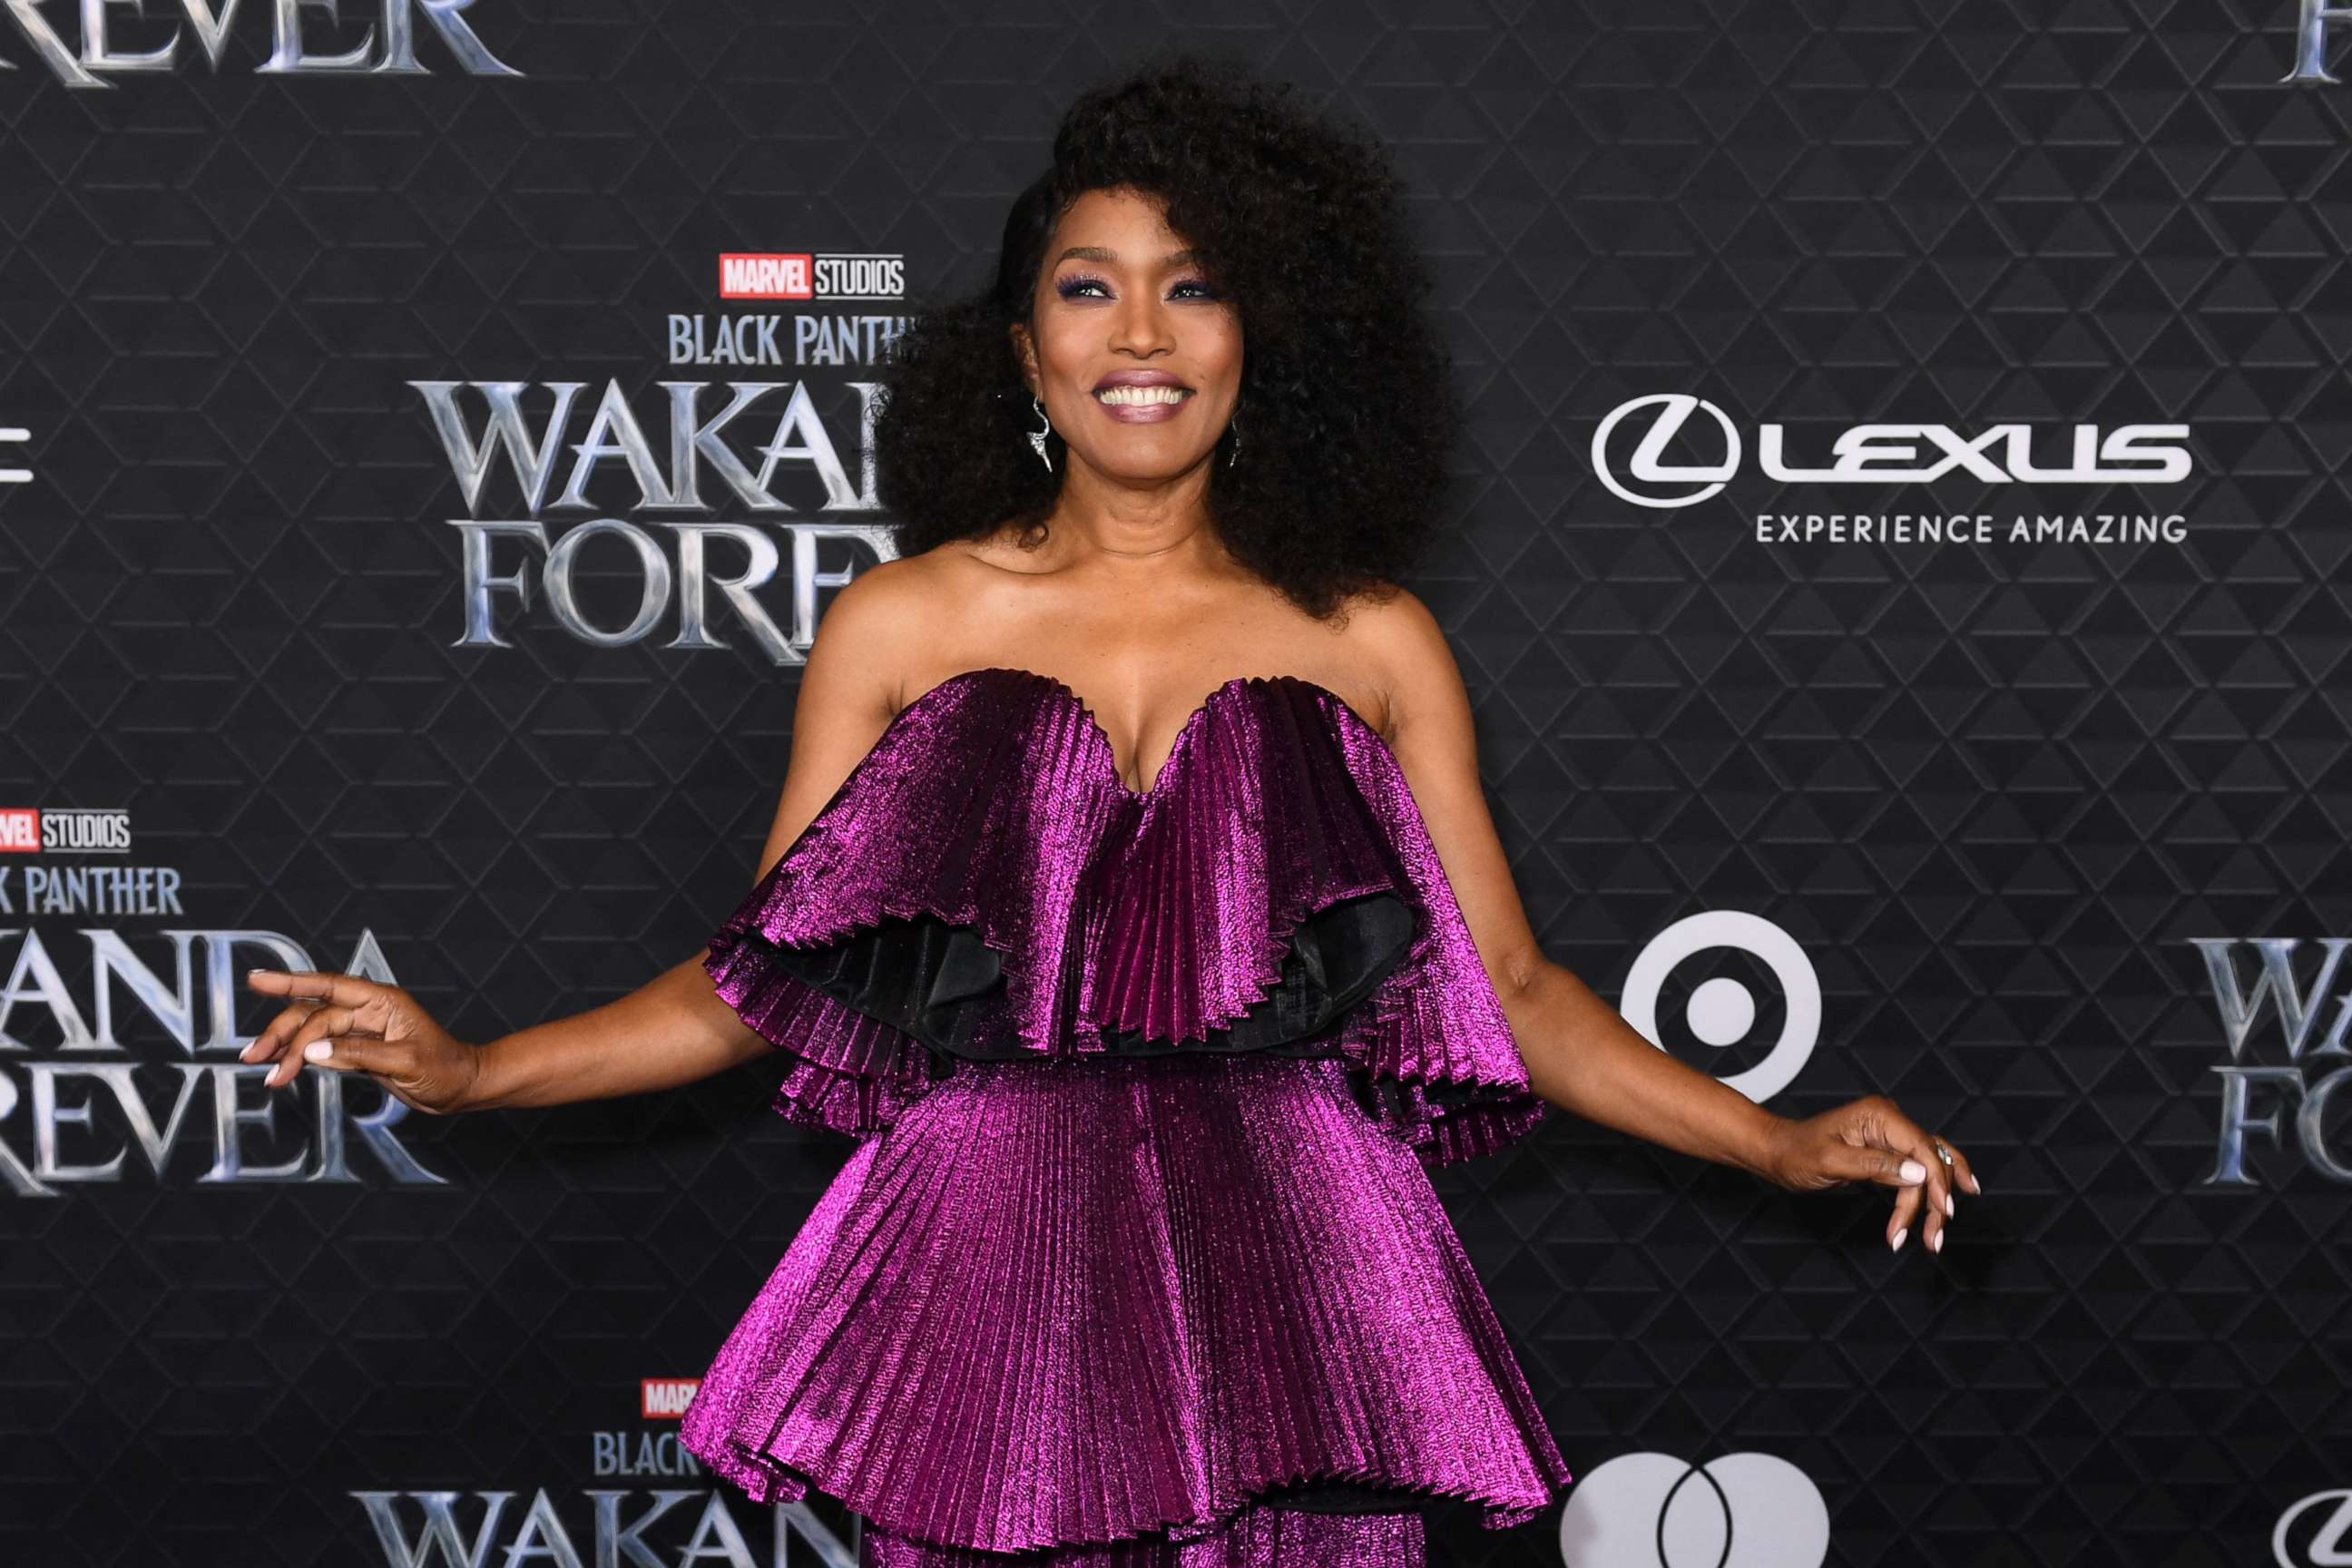 PHOTO: US actress Angela Bassett arrives for the world premiere of Marvel Studios' "Black Panther: Wakanda Forever" at the Dolby Theatre in Hollywood, California, on October 26, 2022.